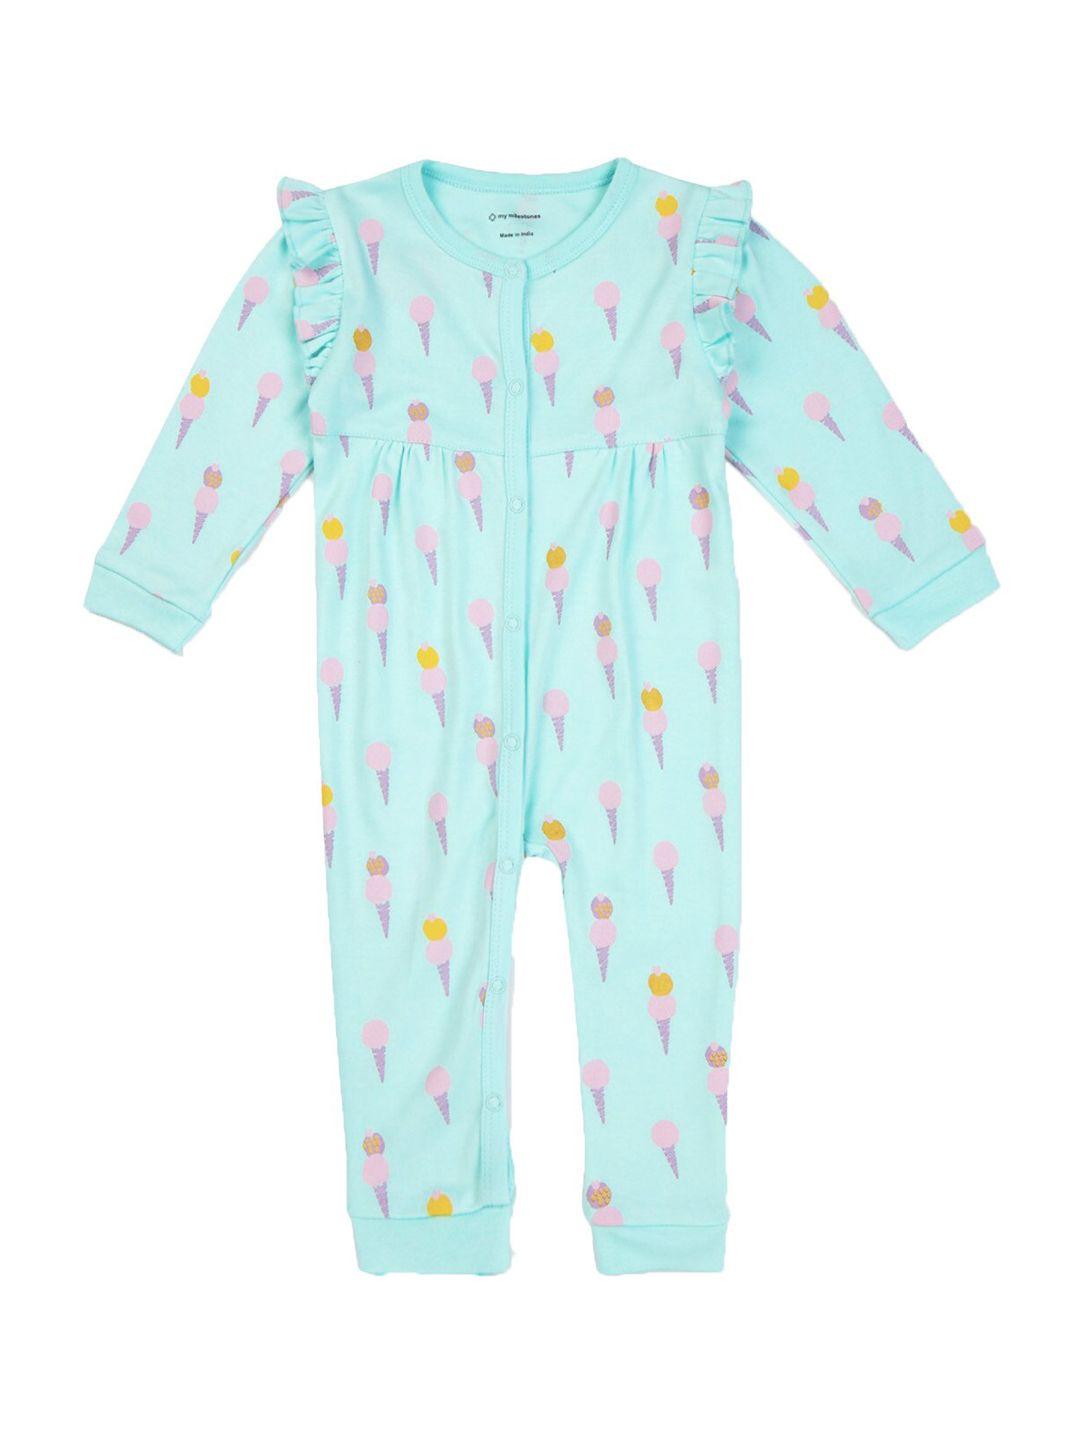 My Milestones Infant Girls Printed Pure Cotton Rompers